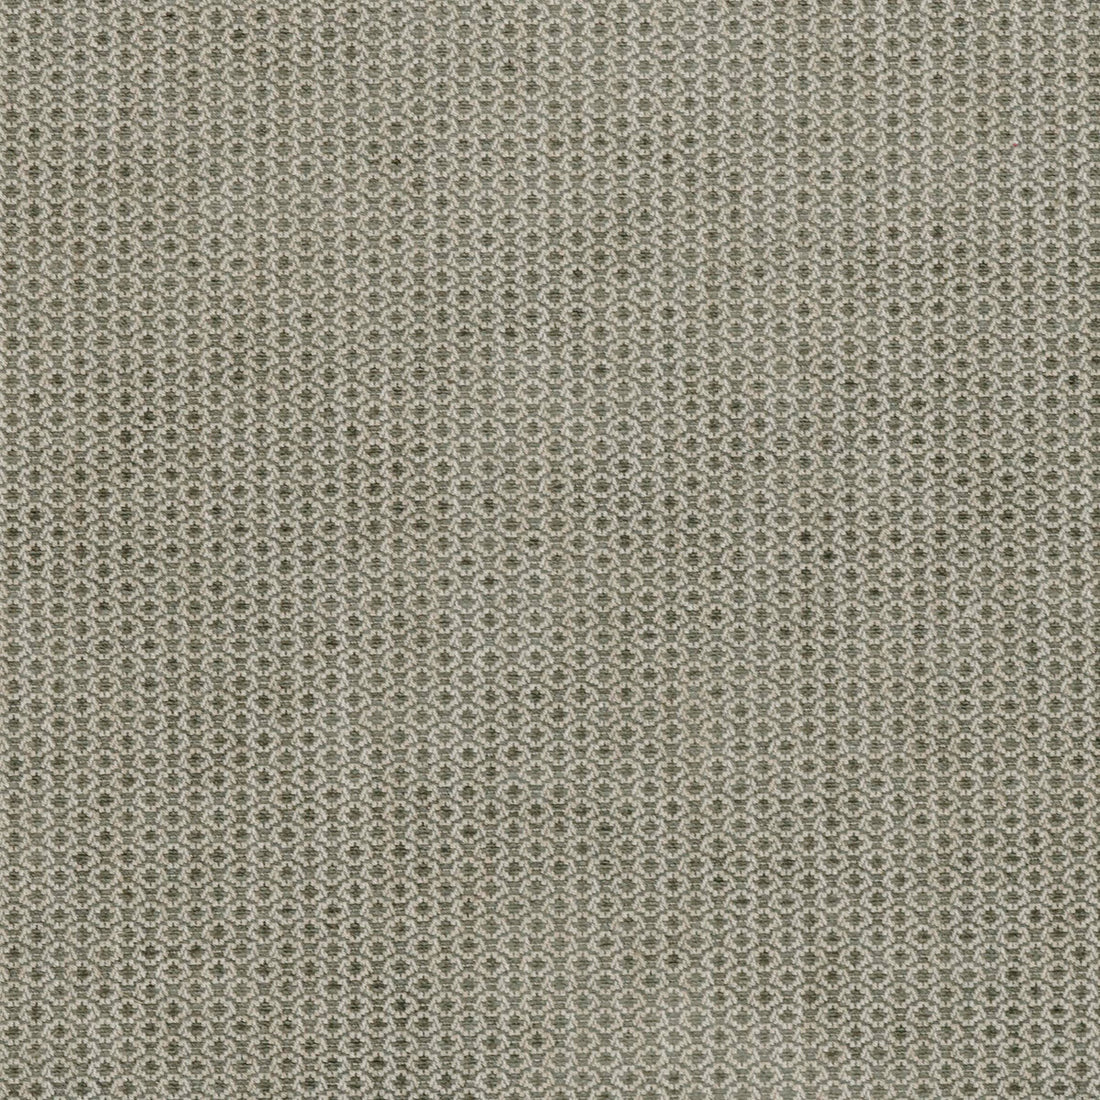 Cosgrove fabric in fawn color - pattern BFC-3672.11.0 - by Lee Jofa in the Blithfield collection